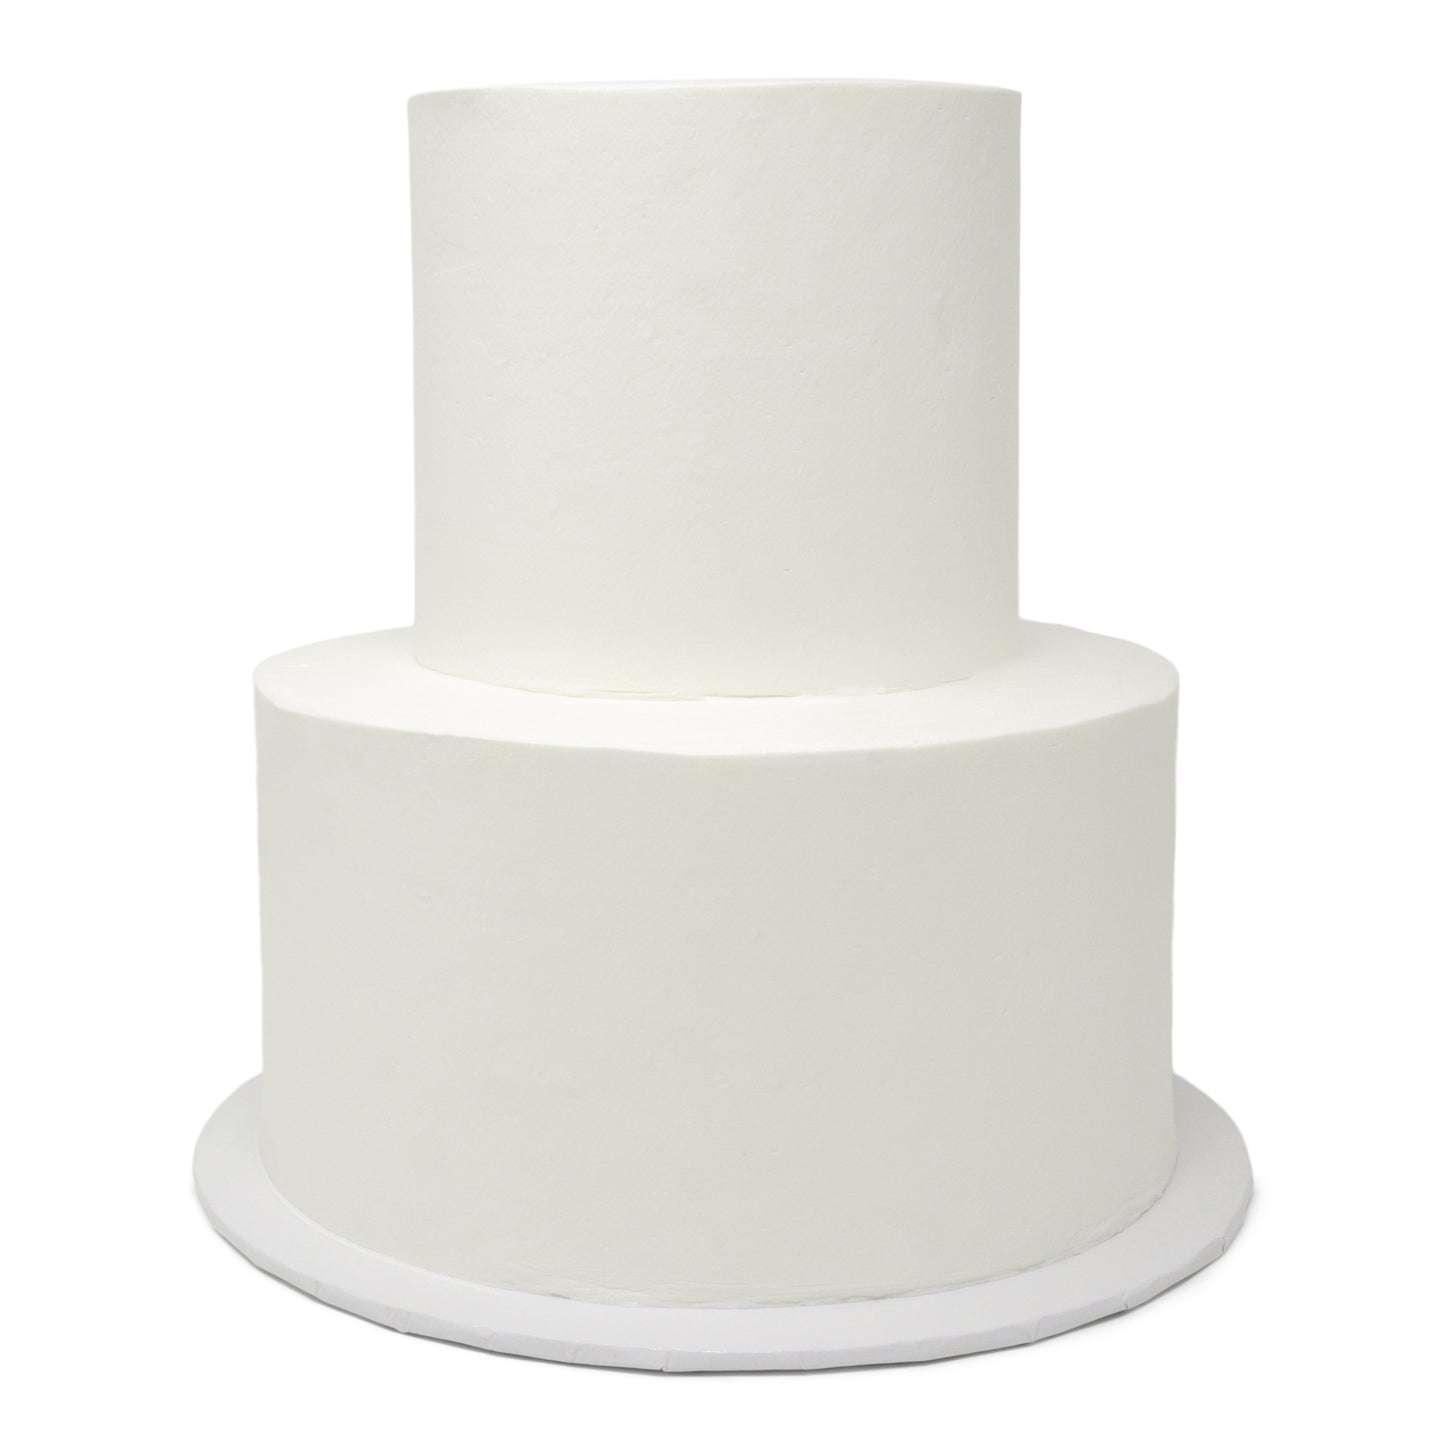 All Smooth - 2 Tier Cake